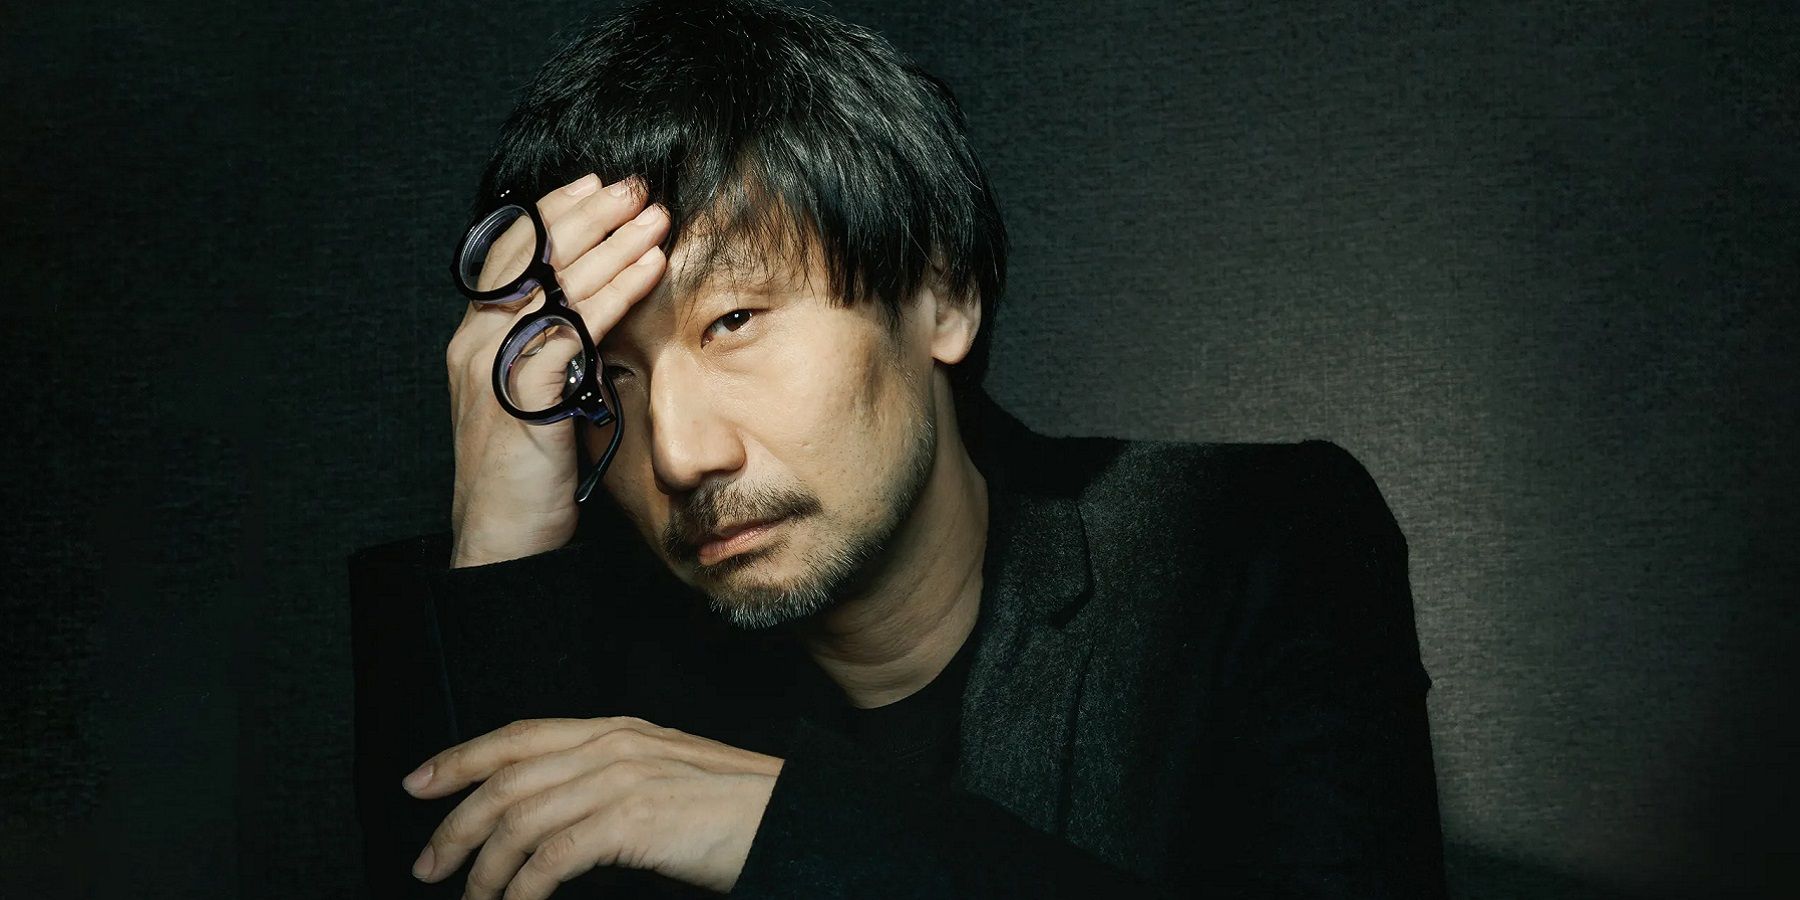 Photo of Hideo Kojima with his head in his hand.